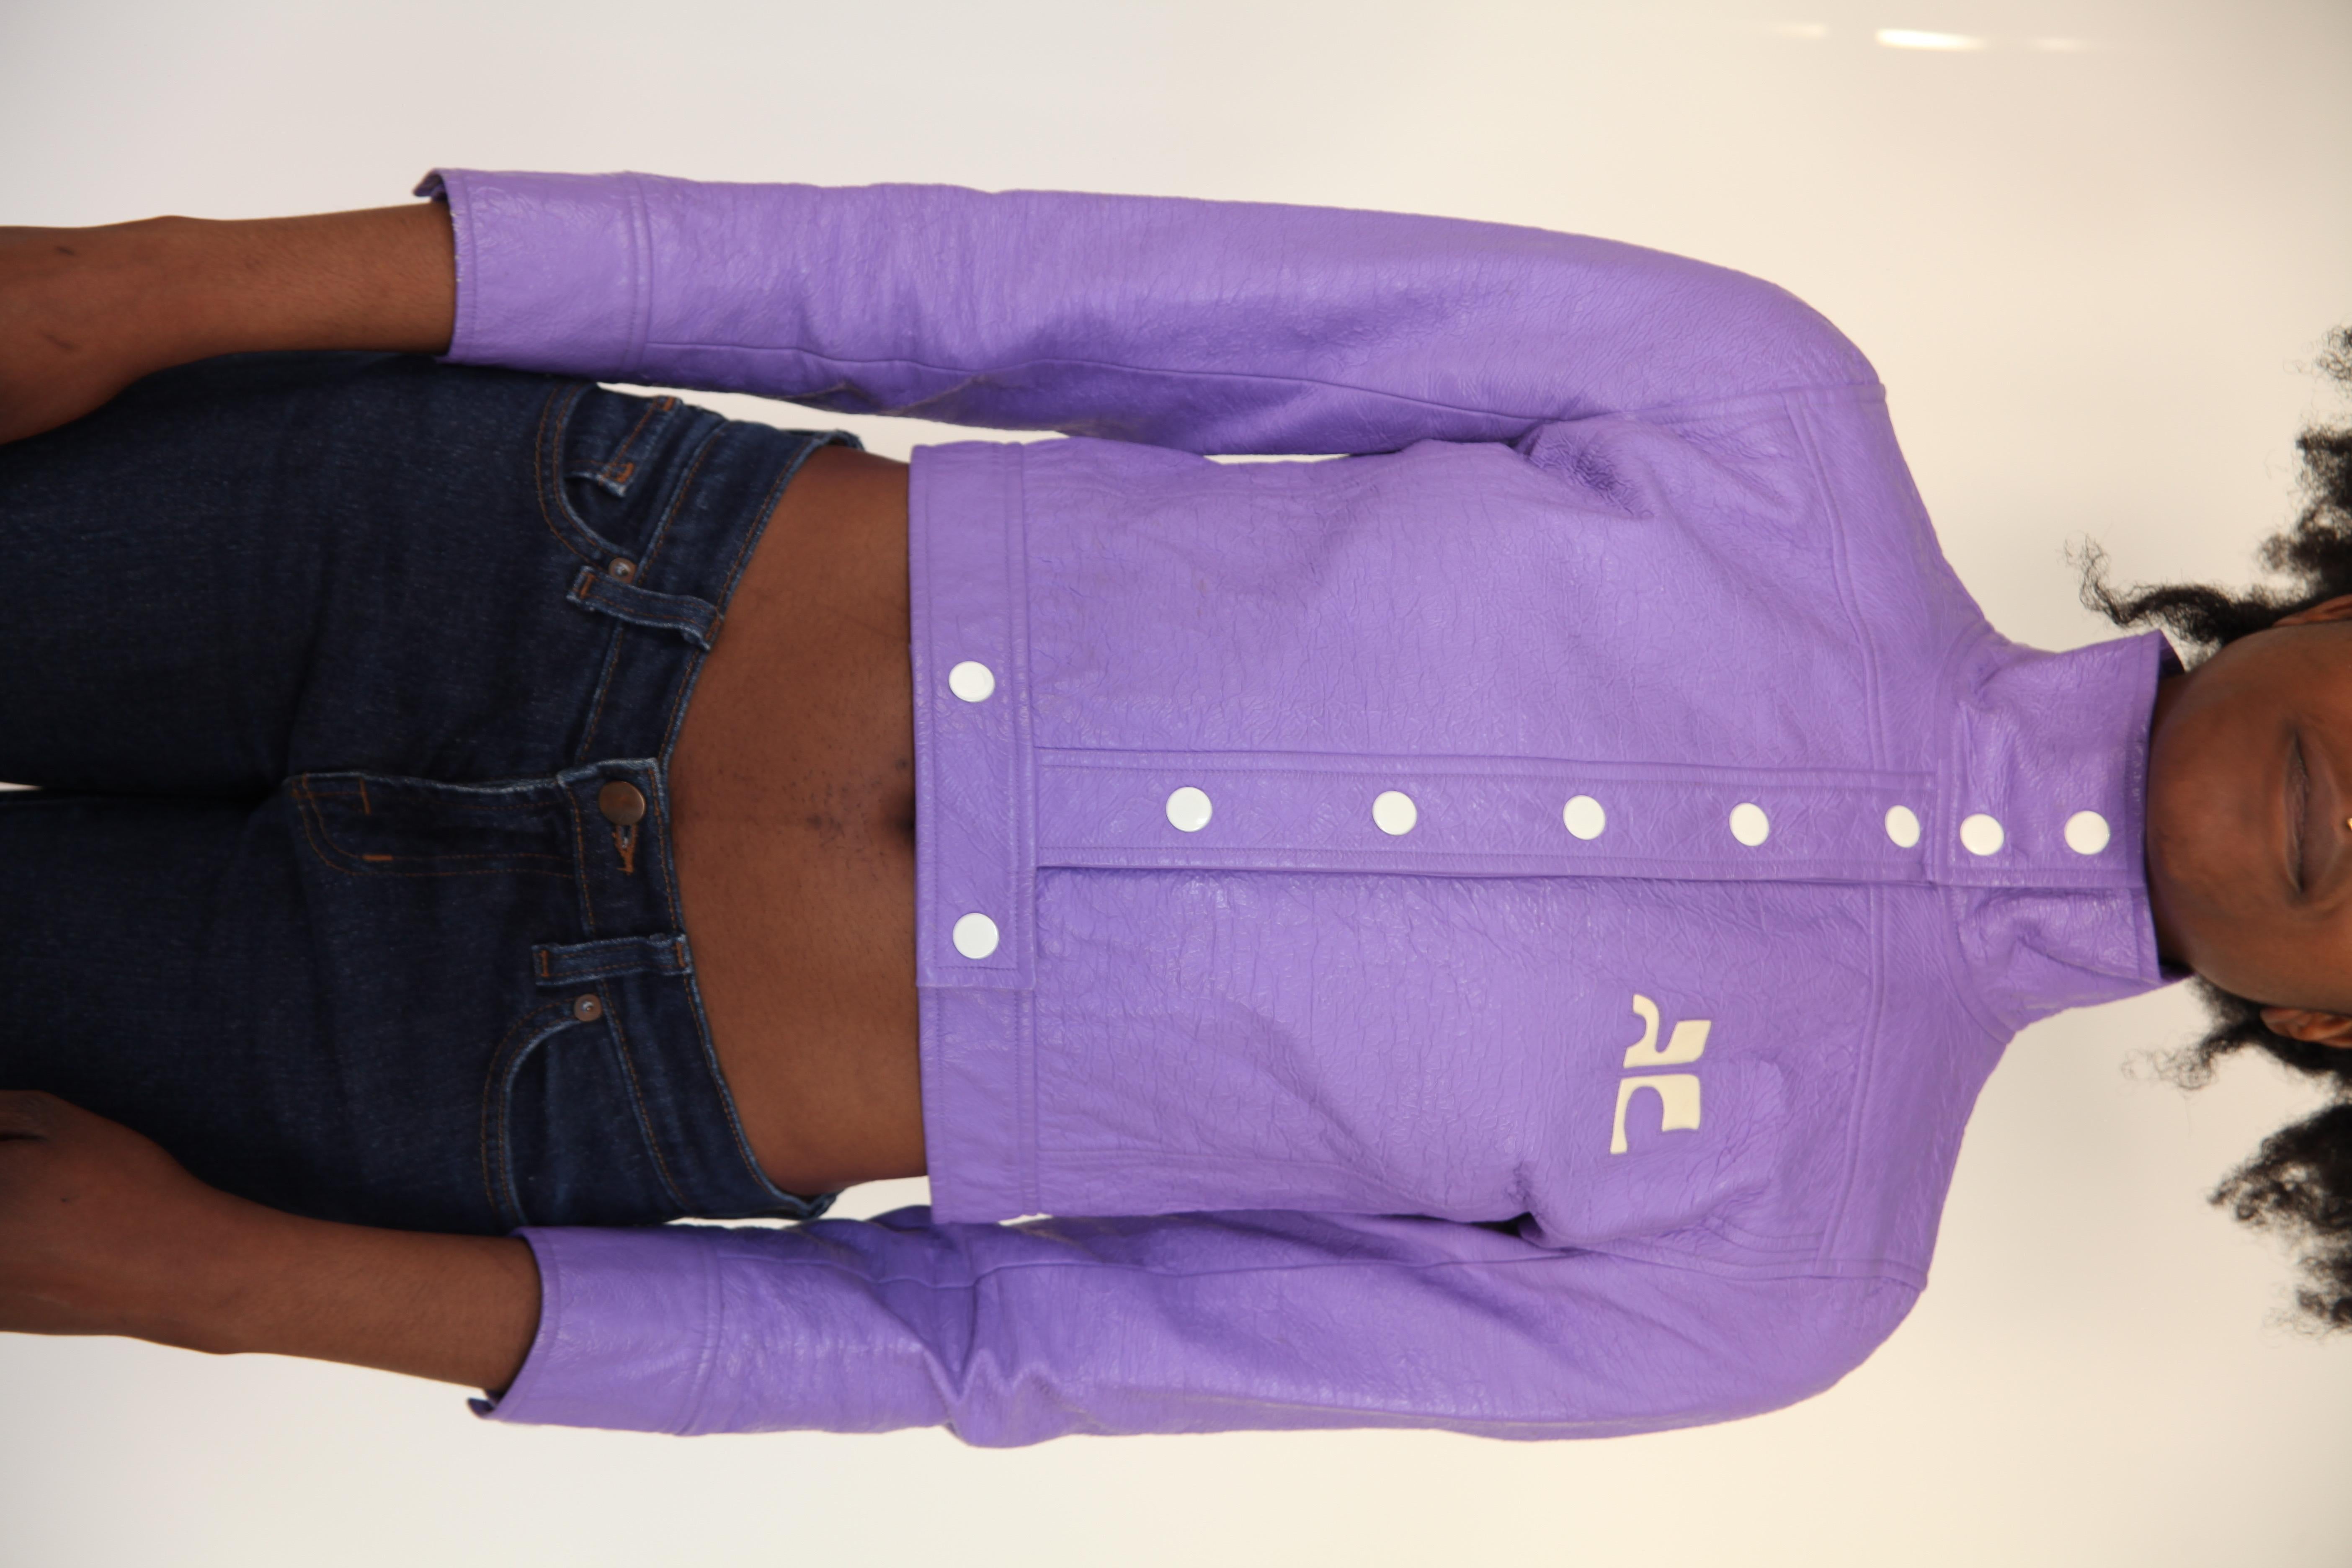 This lavender vinyl mod jacket an undeniable piece of fashion history from the iconic French designer. The piece not only encapsulates the youthful spirit of the time, celebrating the effervescent and modernity of 1960s but it also shows a design